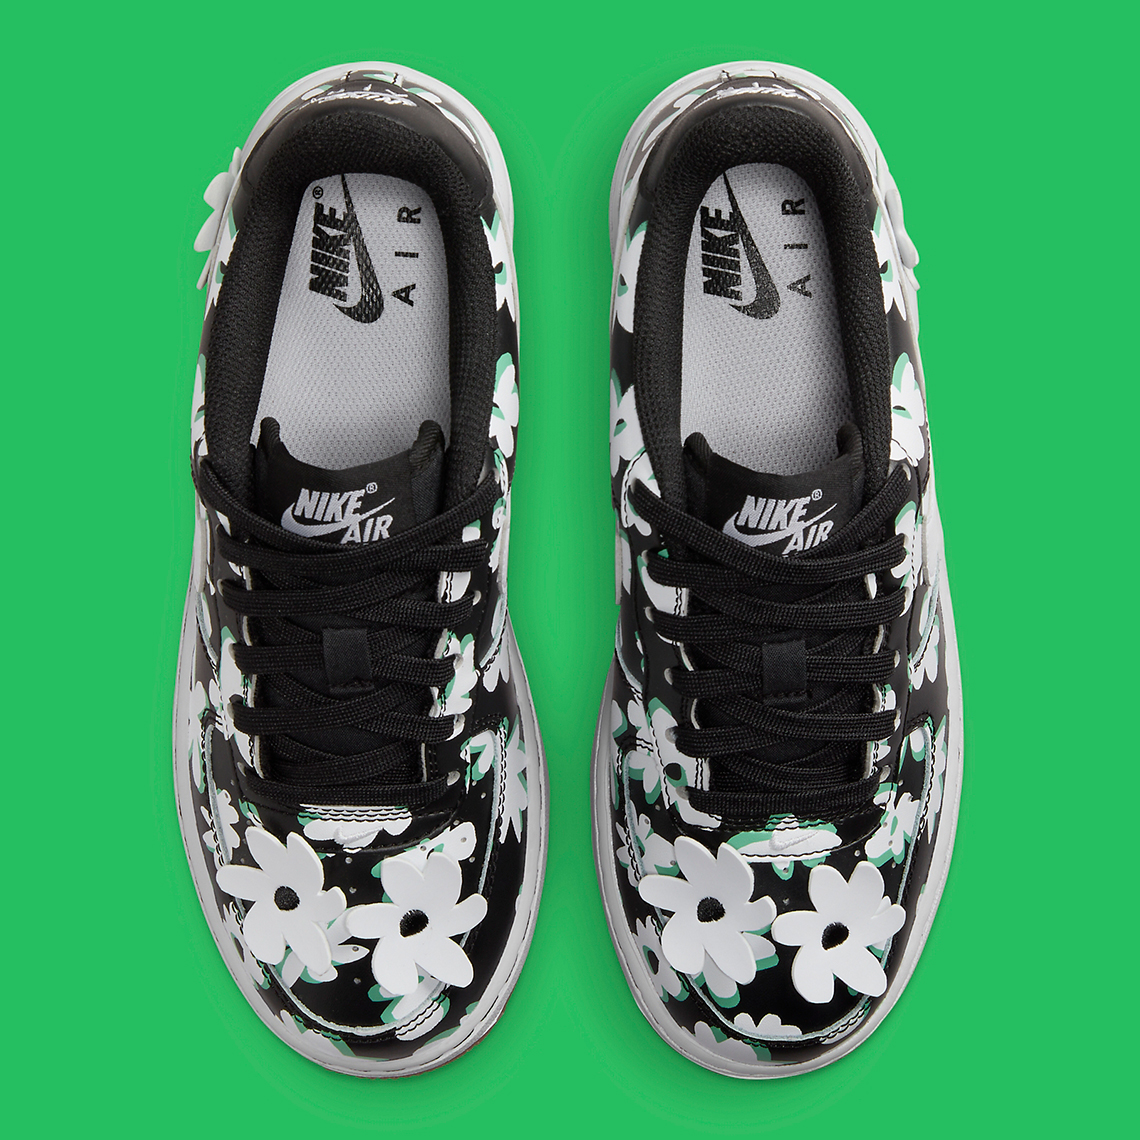 Nike Air Force 1 Low Gs Black White Flowers Dz2663 001 3